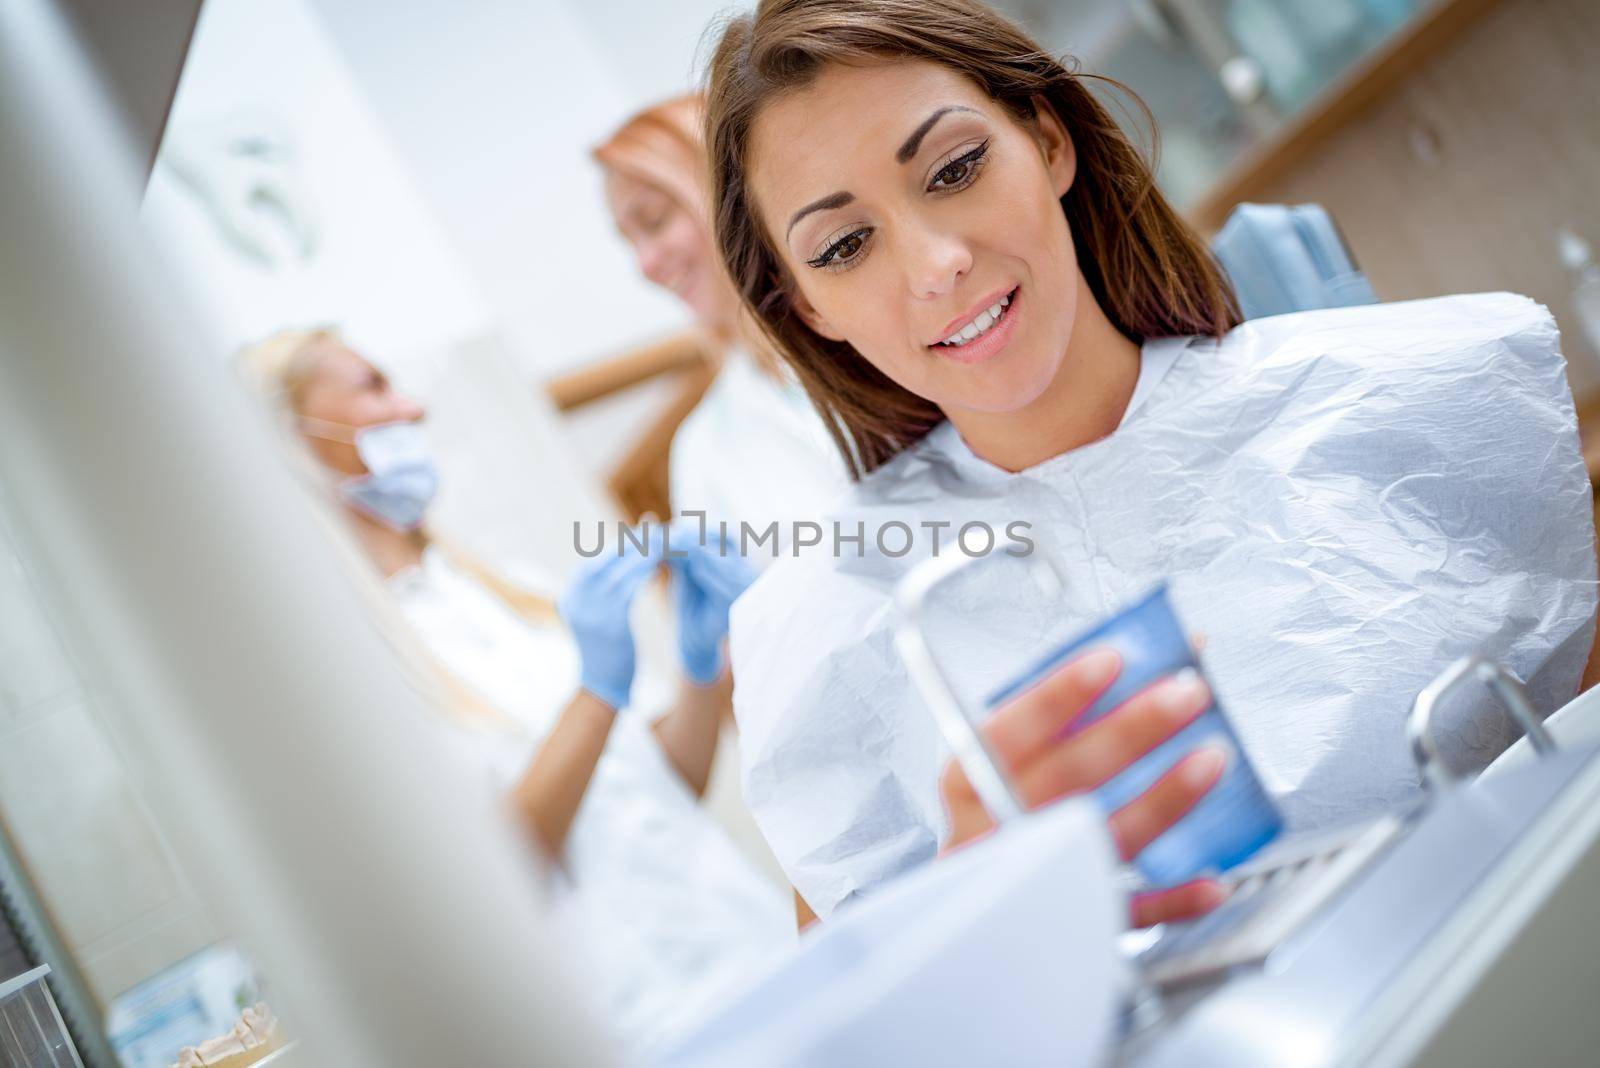 Beautiful young woman in visit at the dentist office preparing for checking up her teeths.